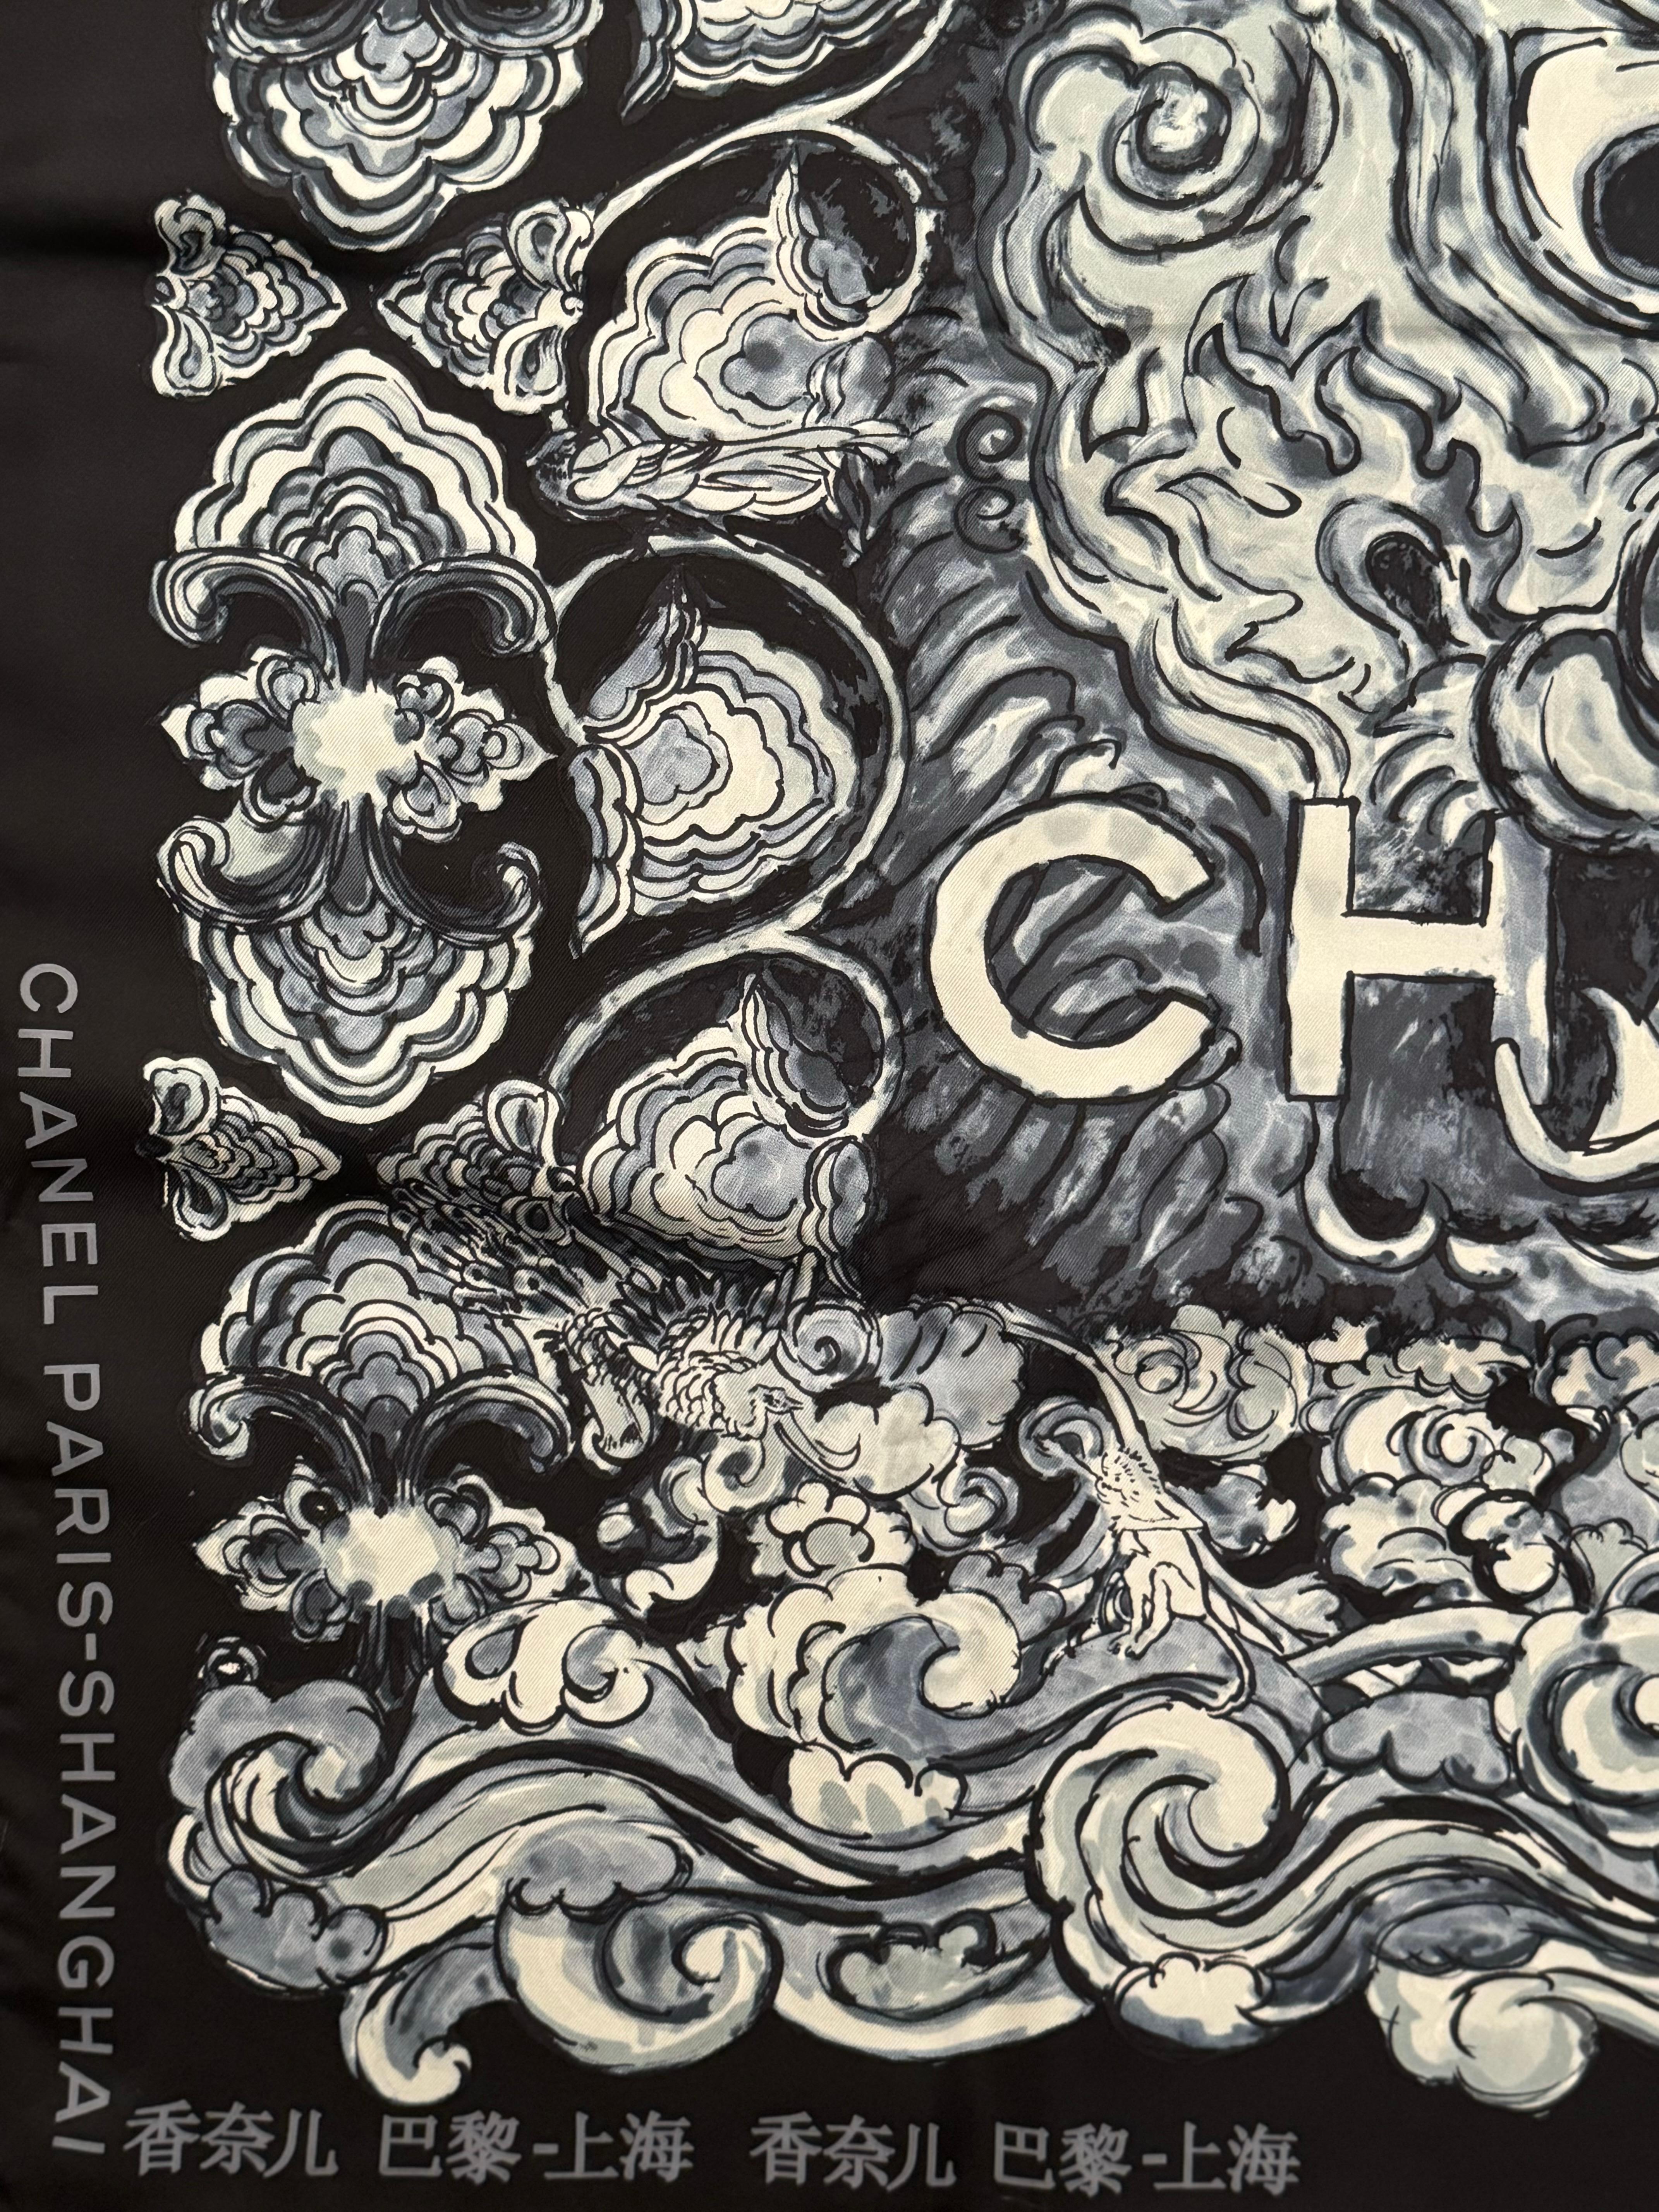 Women's or Men's Rare Chanel Paris Shanghai 2010 silk scarf limited edition  For Sale